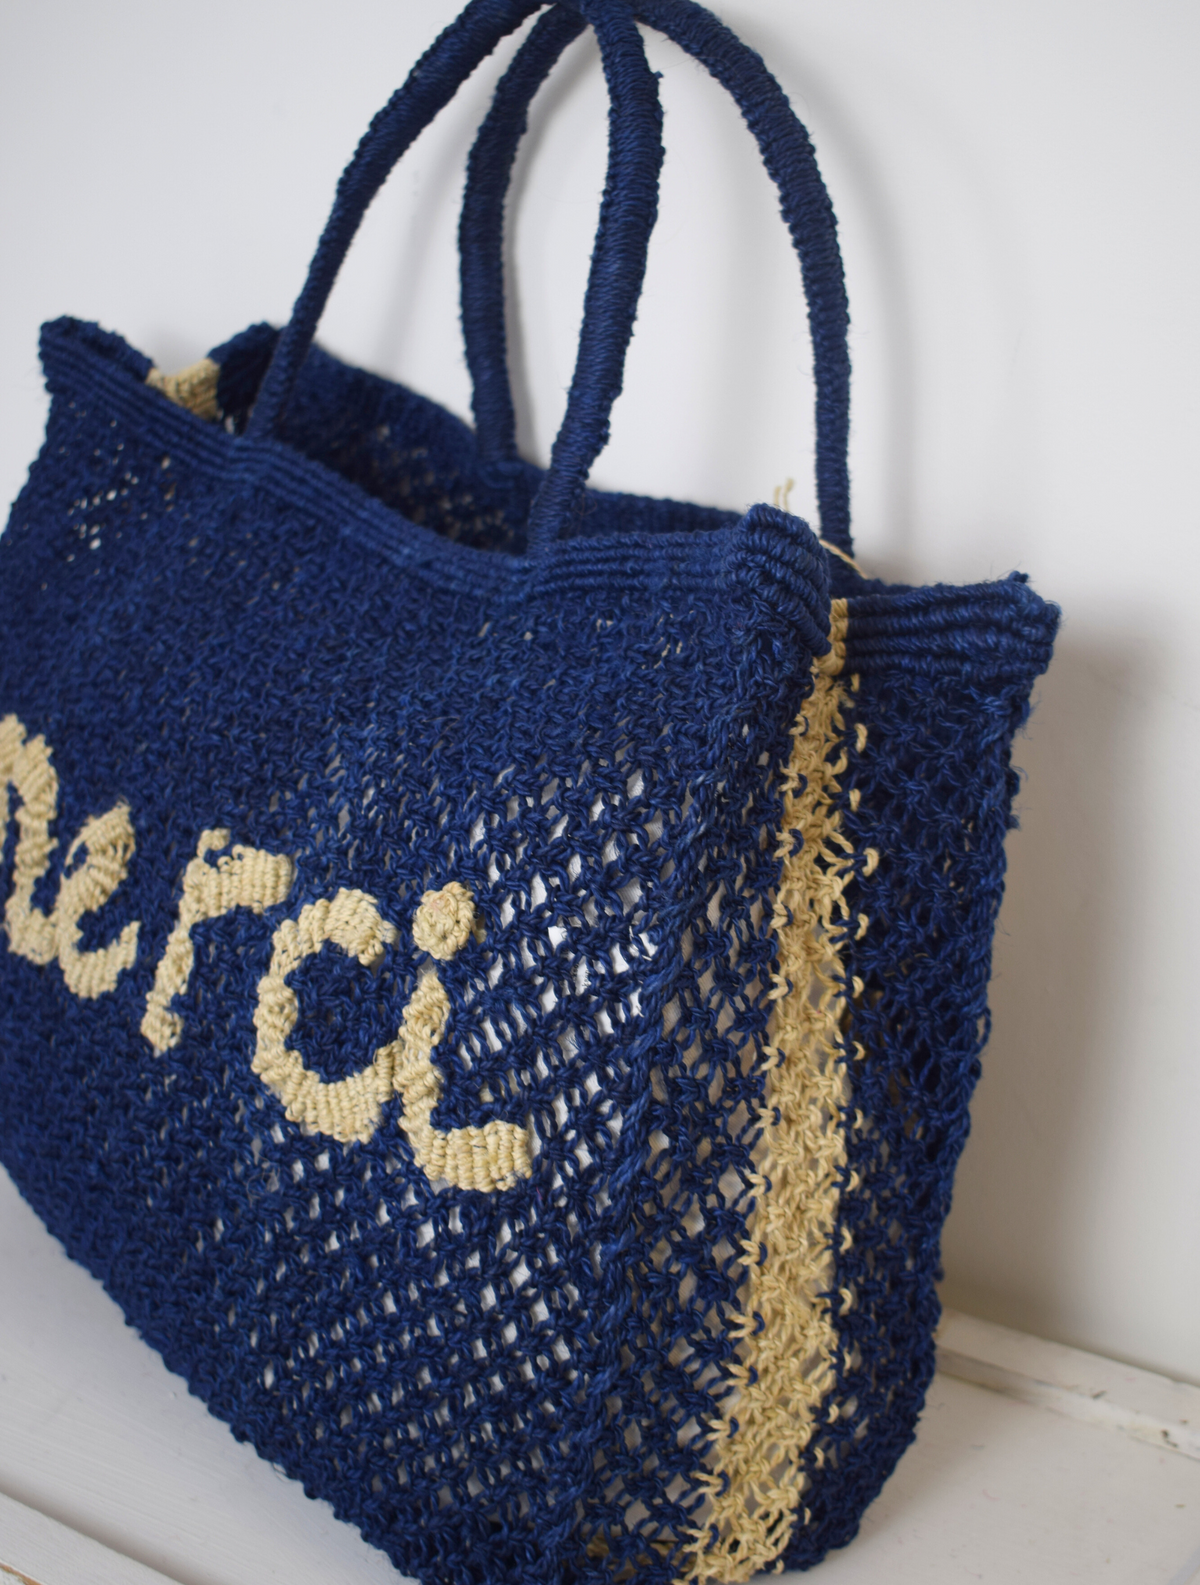 Blue woven bag with neautral writing on saying Merci